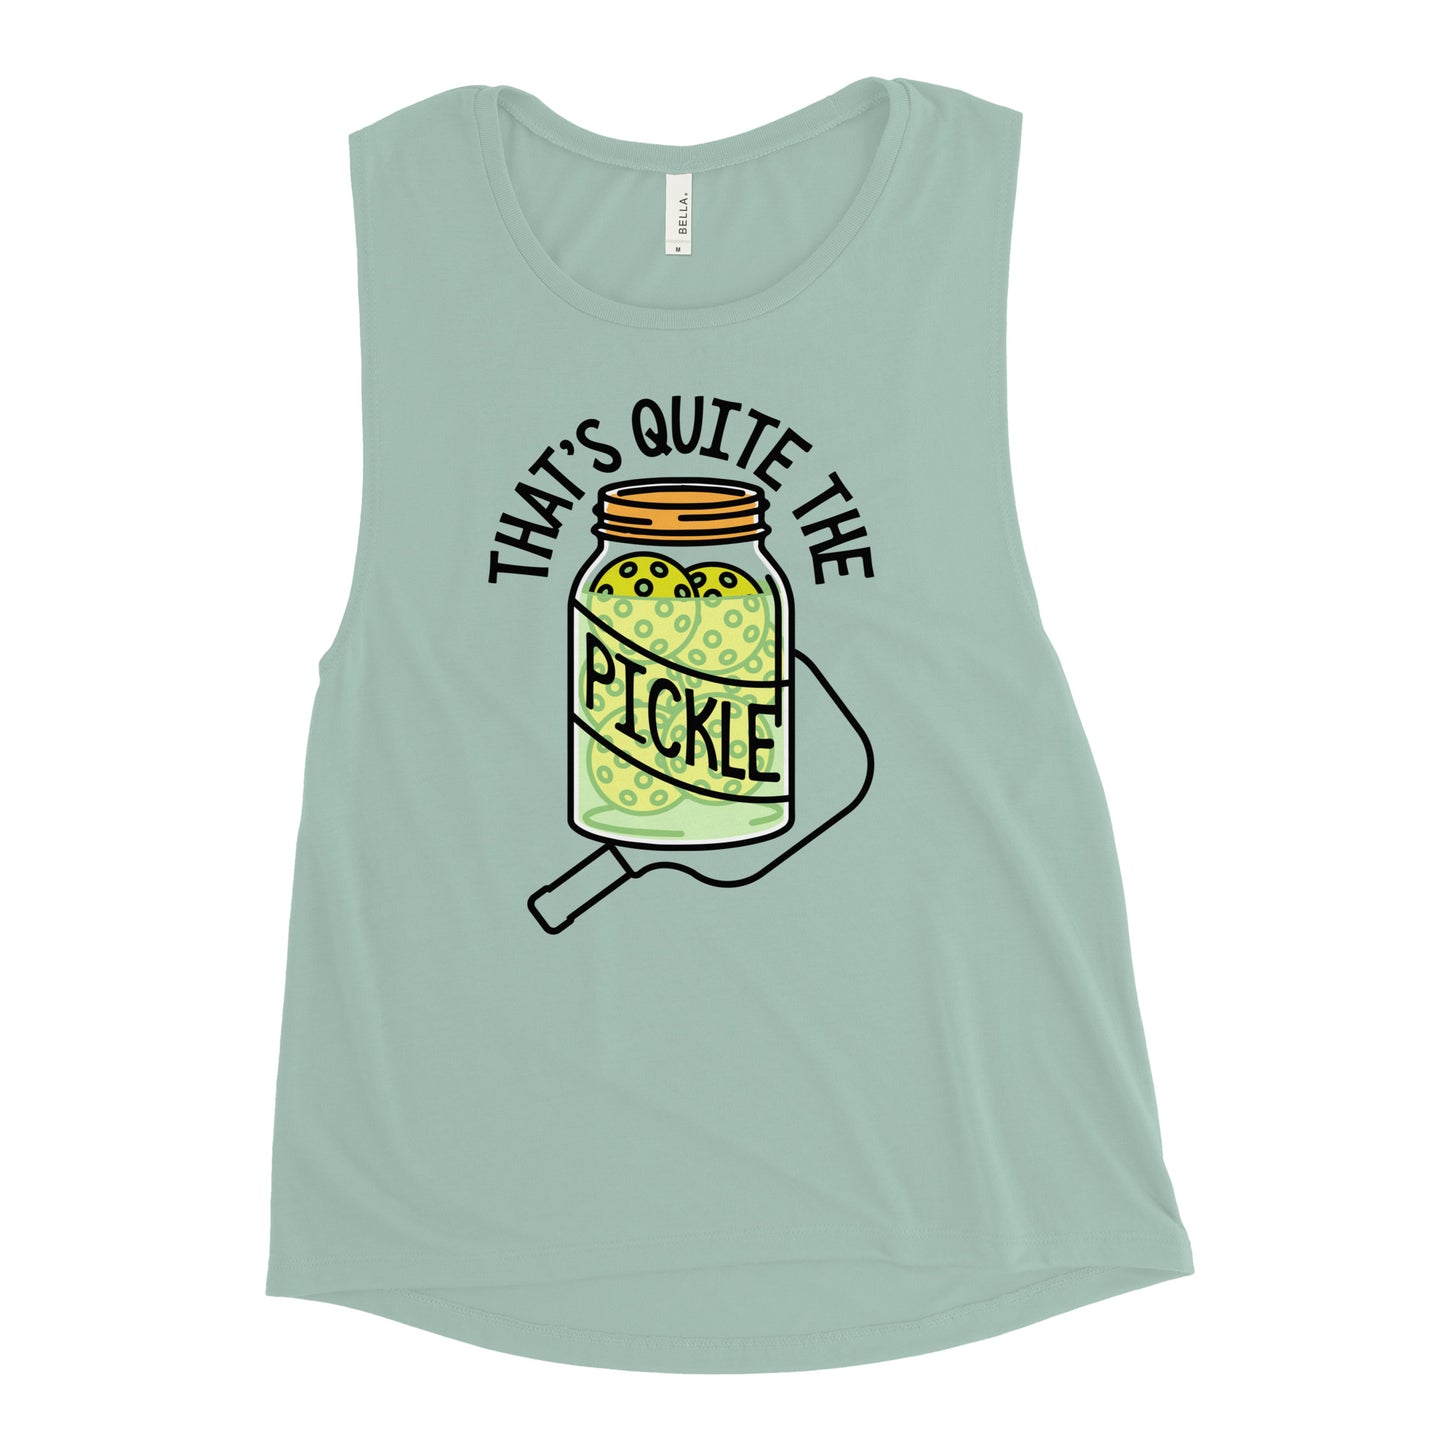 That's Quite The Pickle Women's Muscle Tank